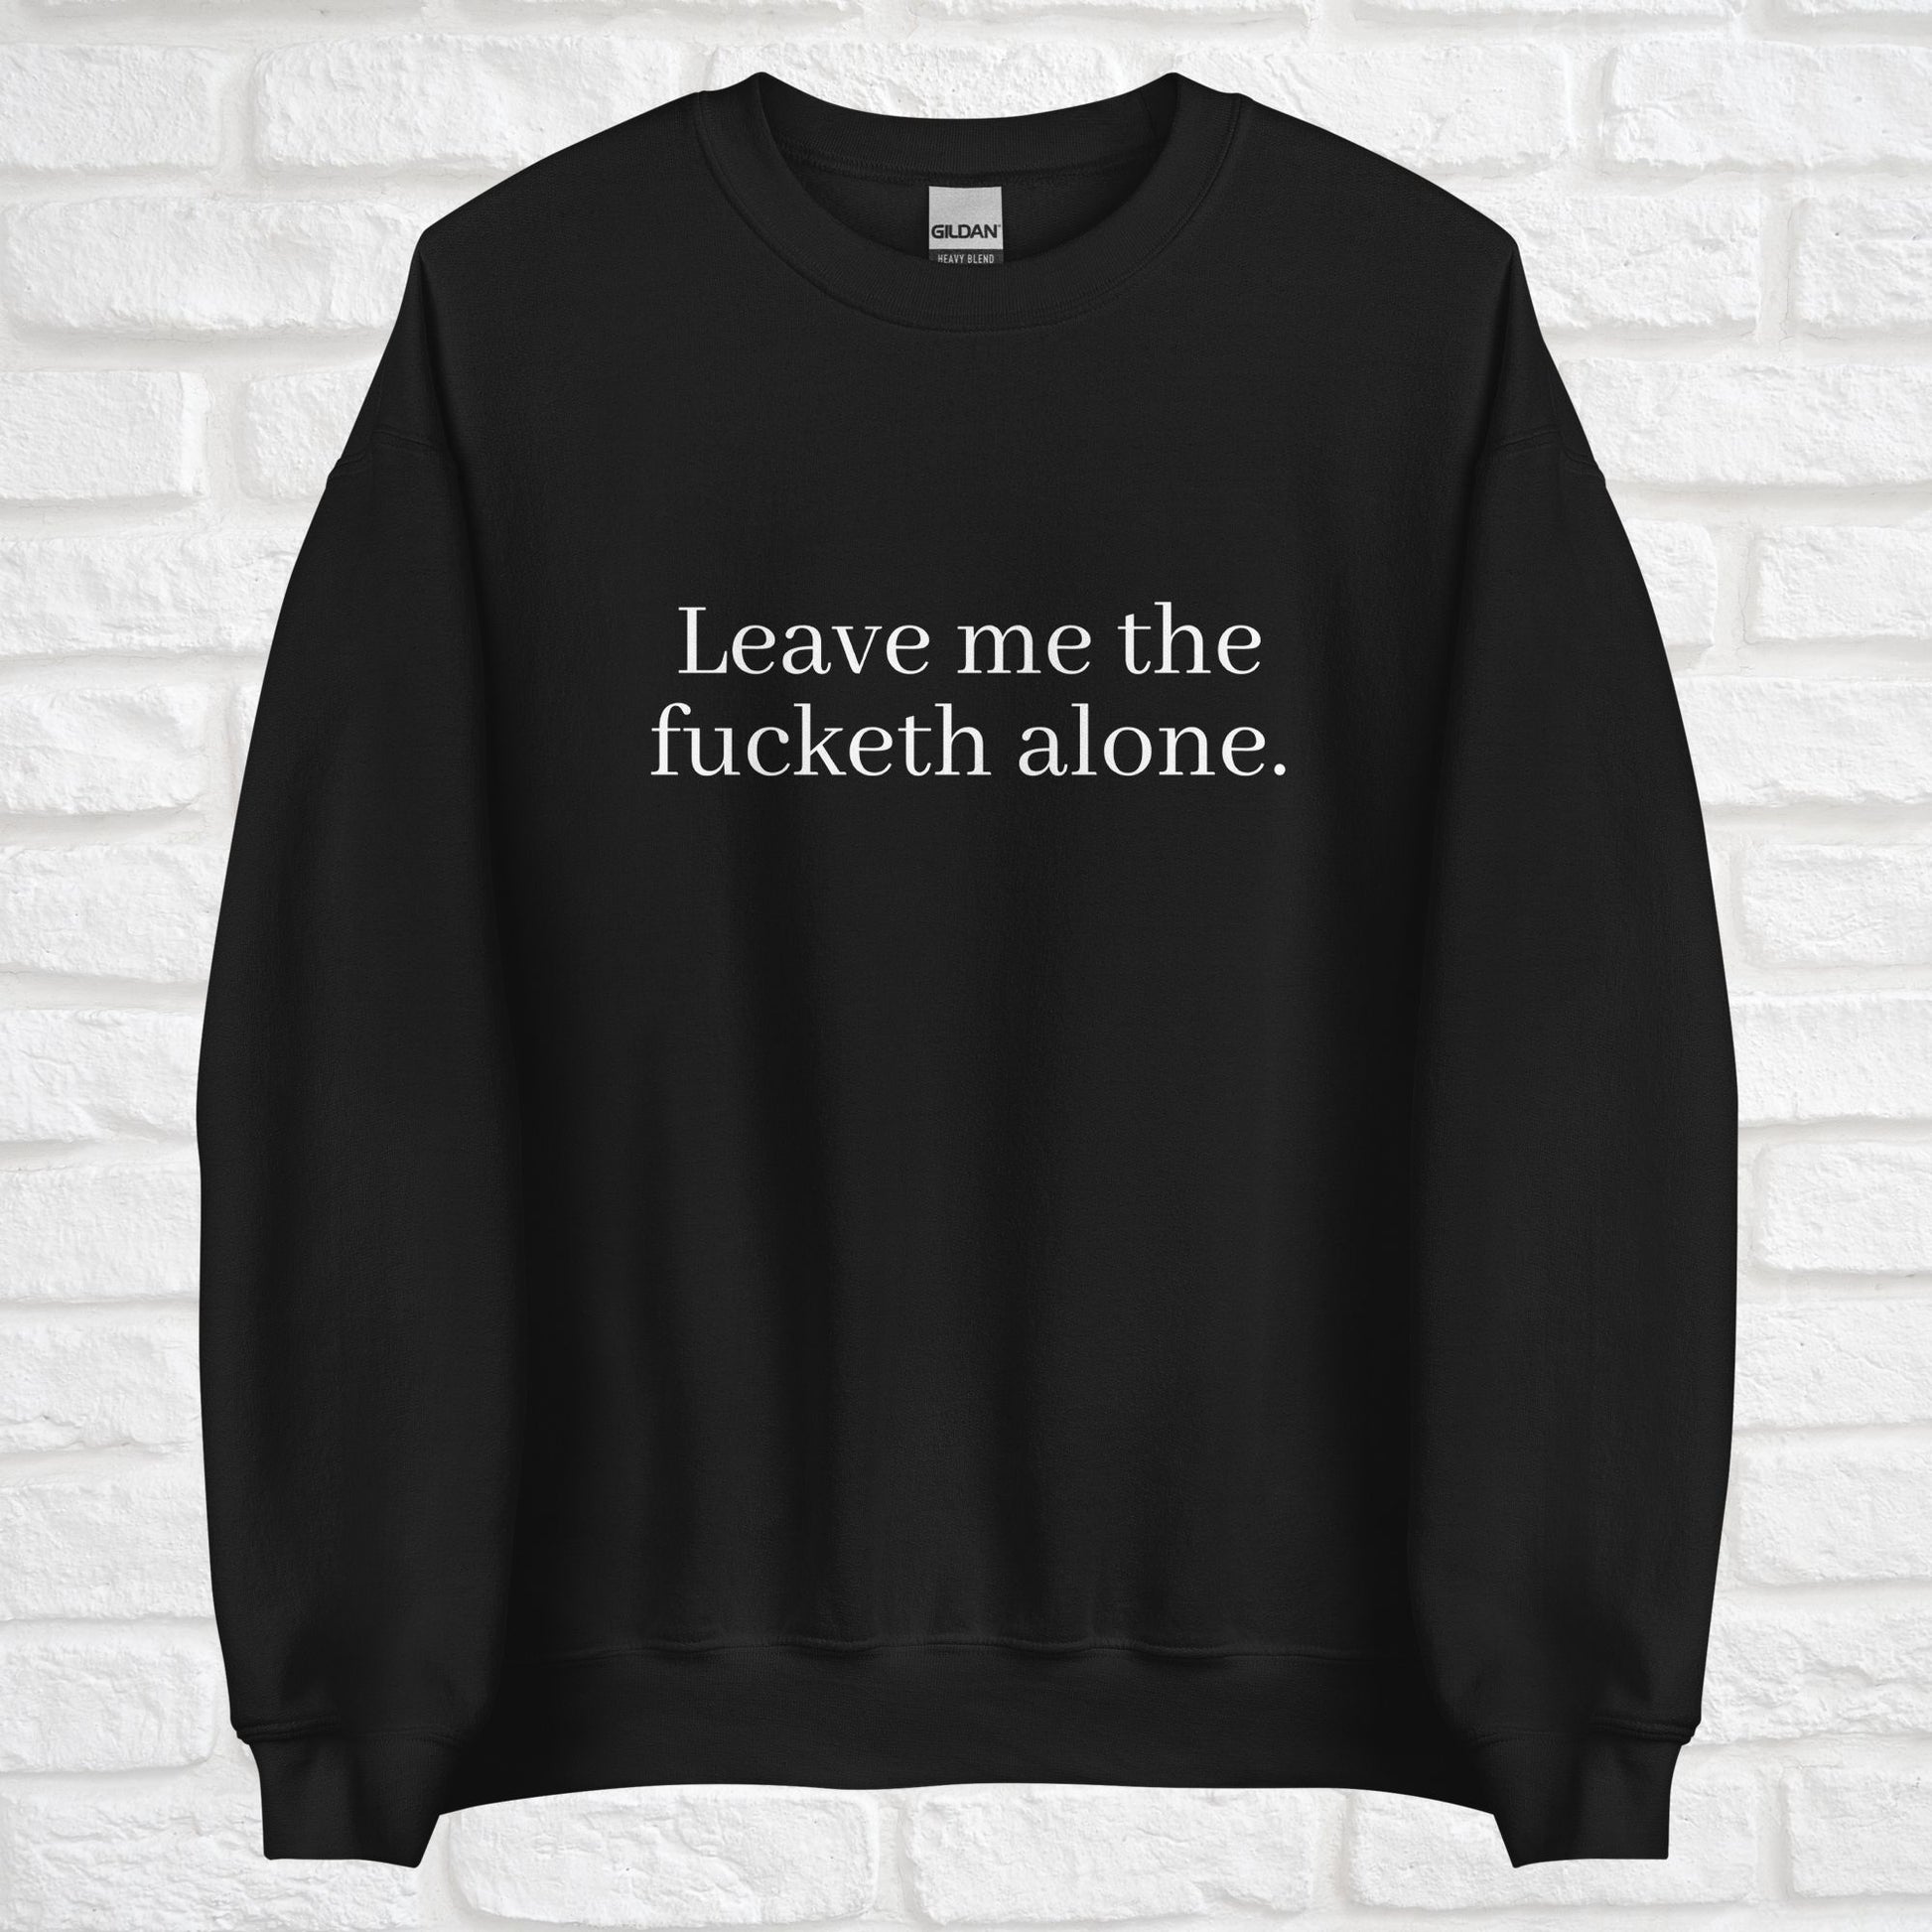 A black crewneck sweatshirt has a funny saying on it in white that says "leave me the fucketh alone". The sweatshirt is tapered at the bottom of the shirt and sleeves. White bricks are in the background.